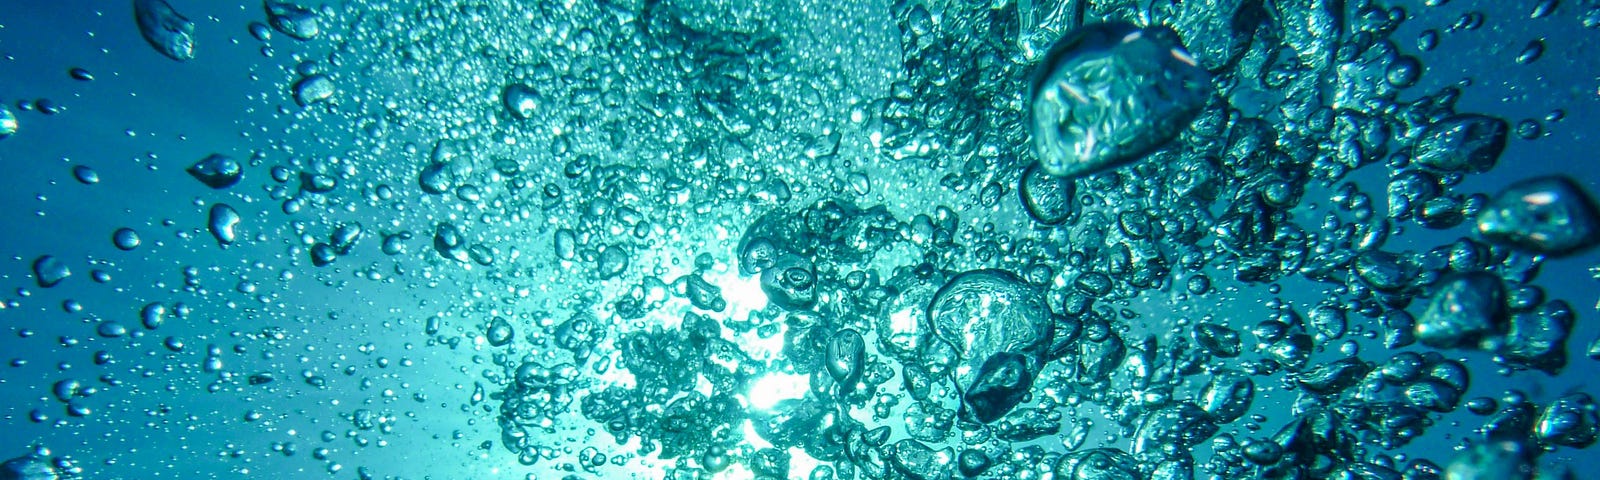 Photo: looking up through bubbles toward the surface of a large body of water. Water is blue and can see sunlight.